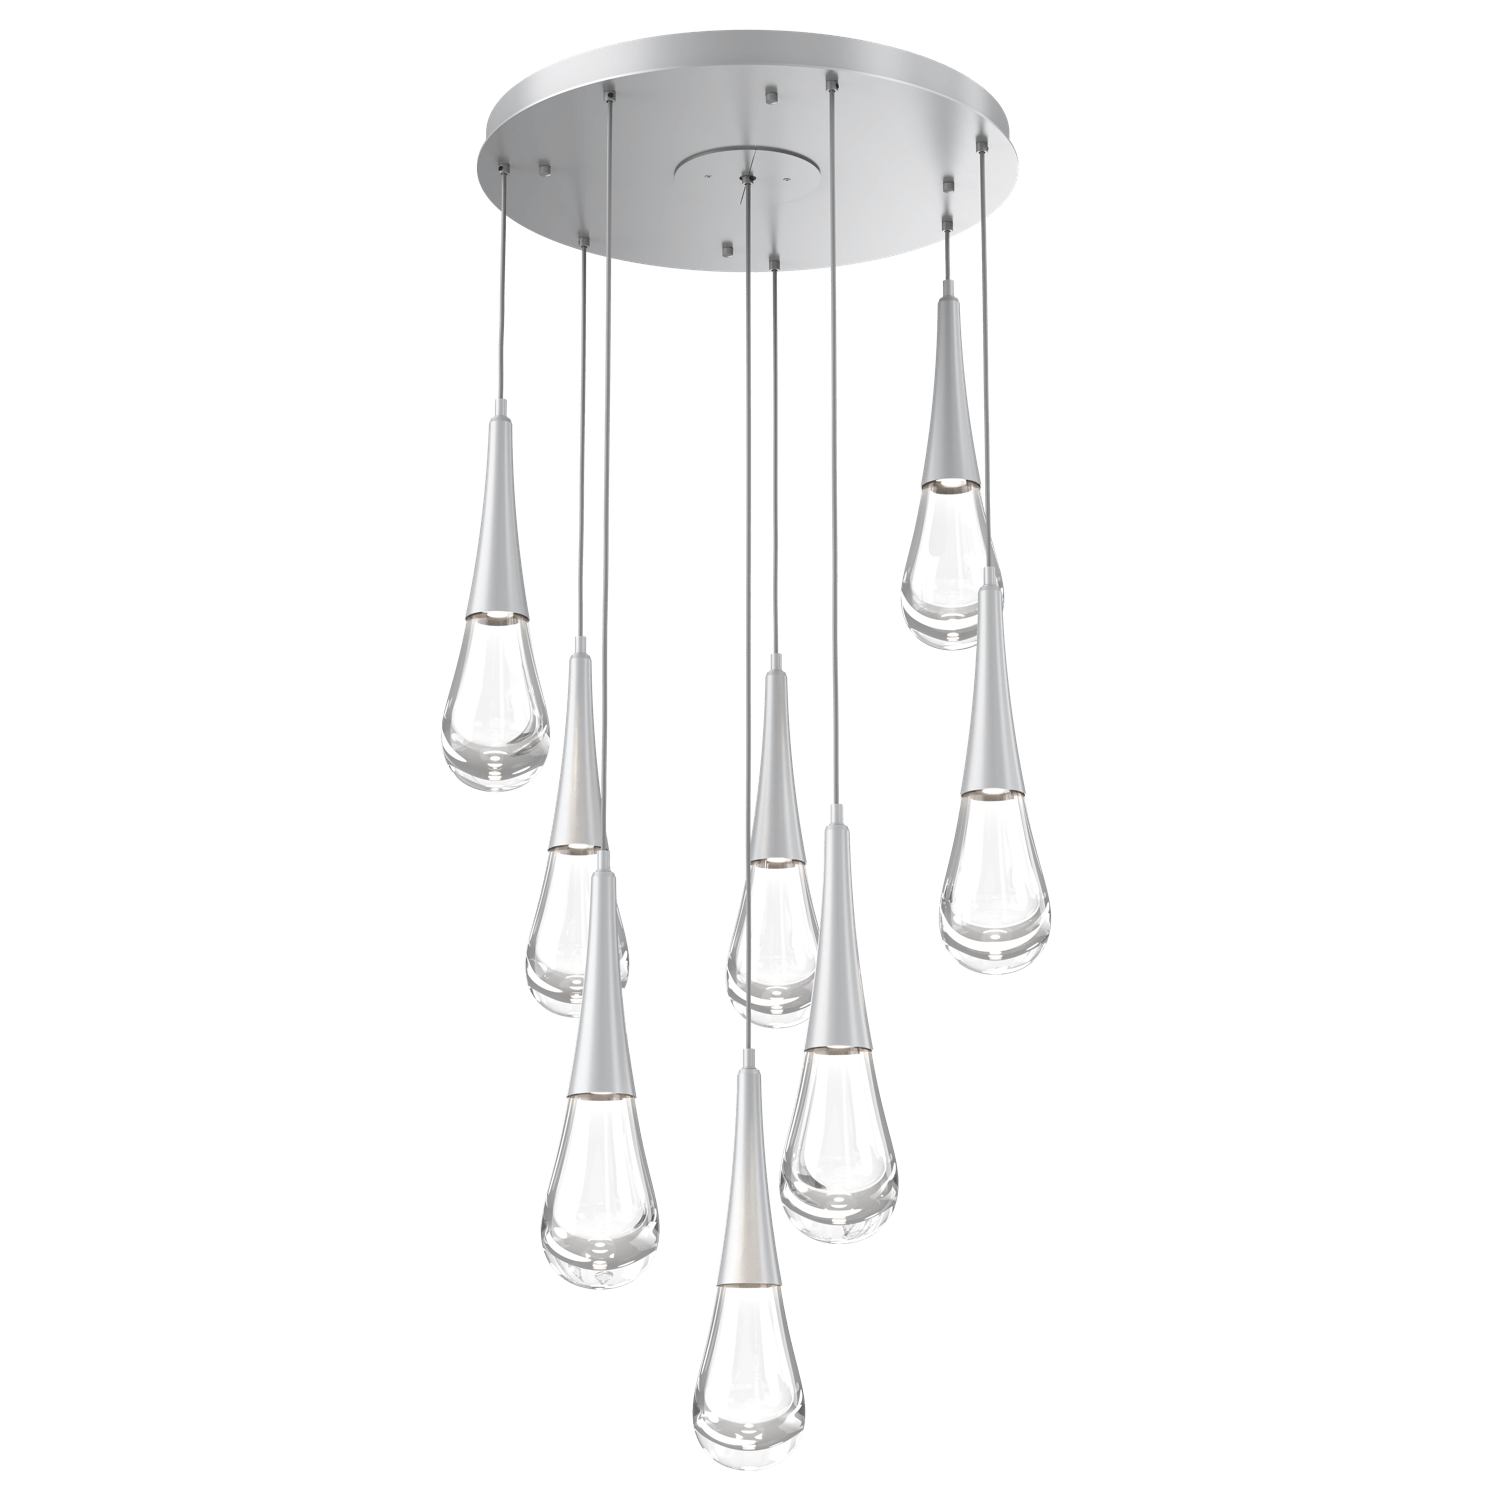 CHB0078-08-CS-Hammerton-Studio-Raindrop-8-light-round-pendant-chandelier-with-classic-silver-finish-and-clear-blown-glass-shades-and-LED-lamping